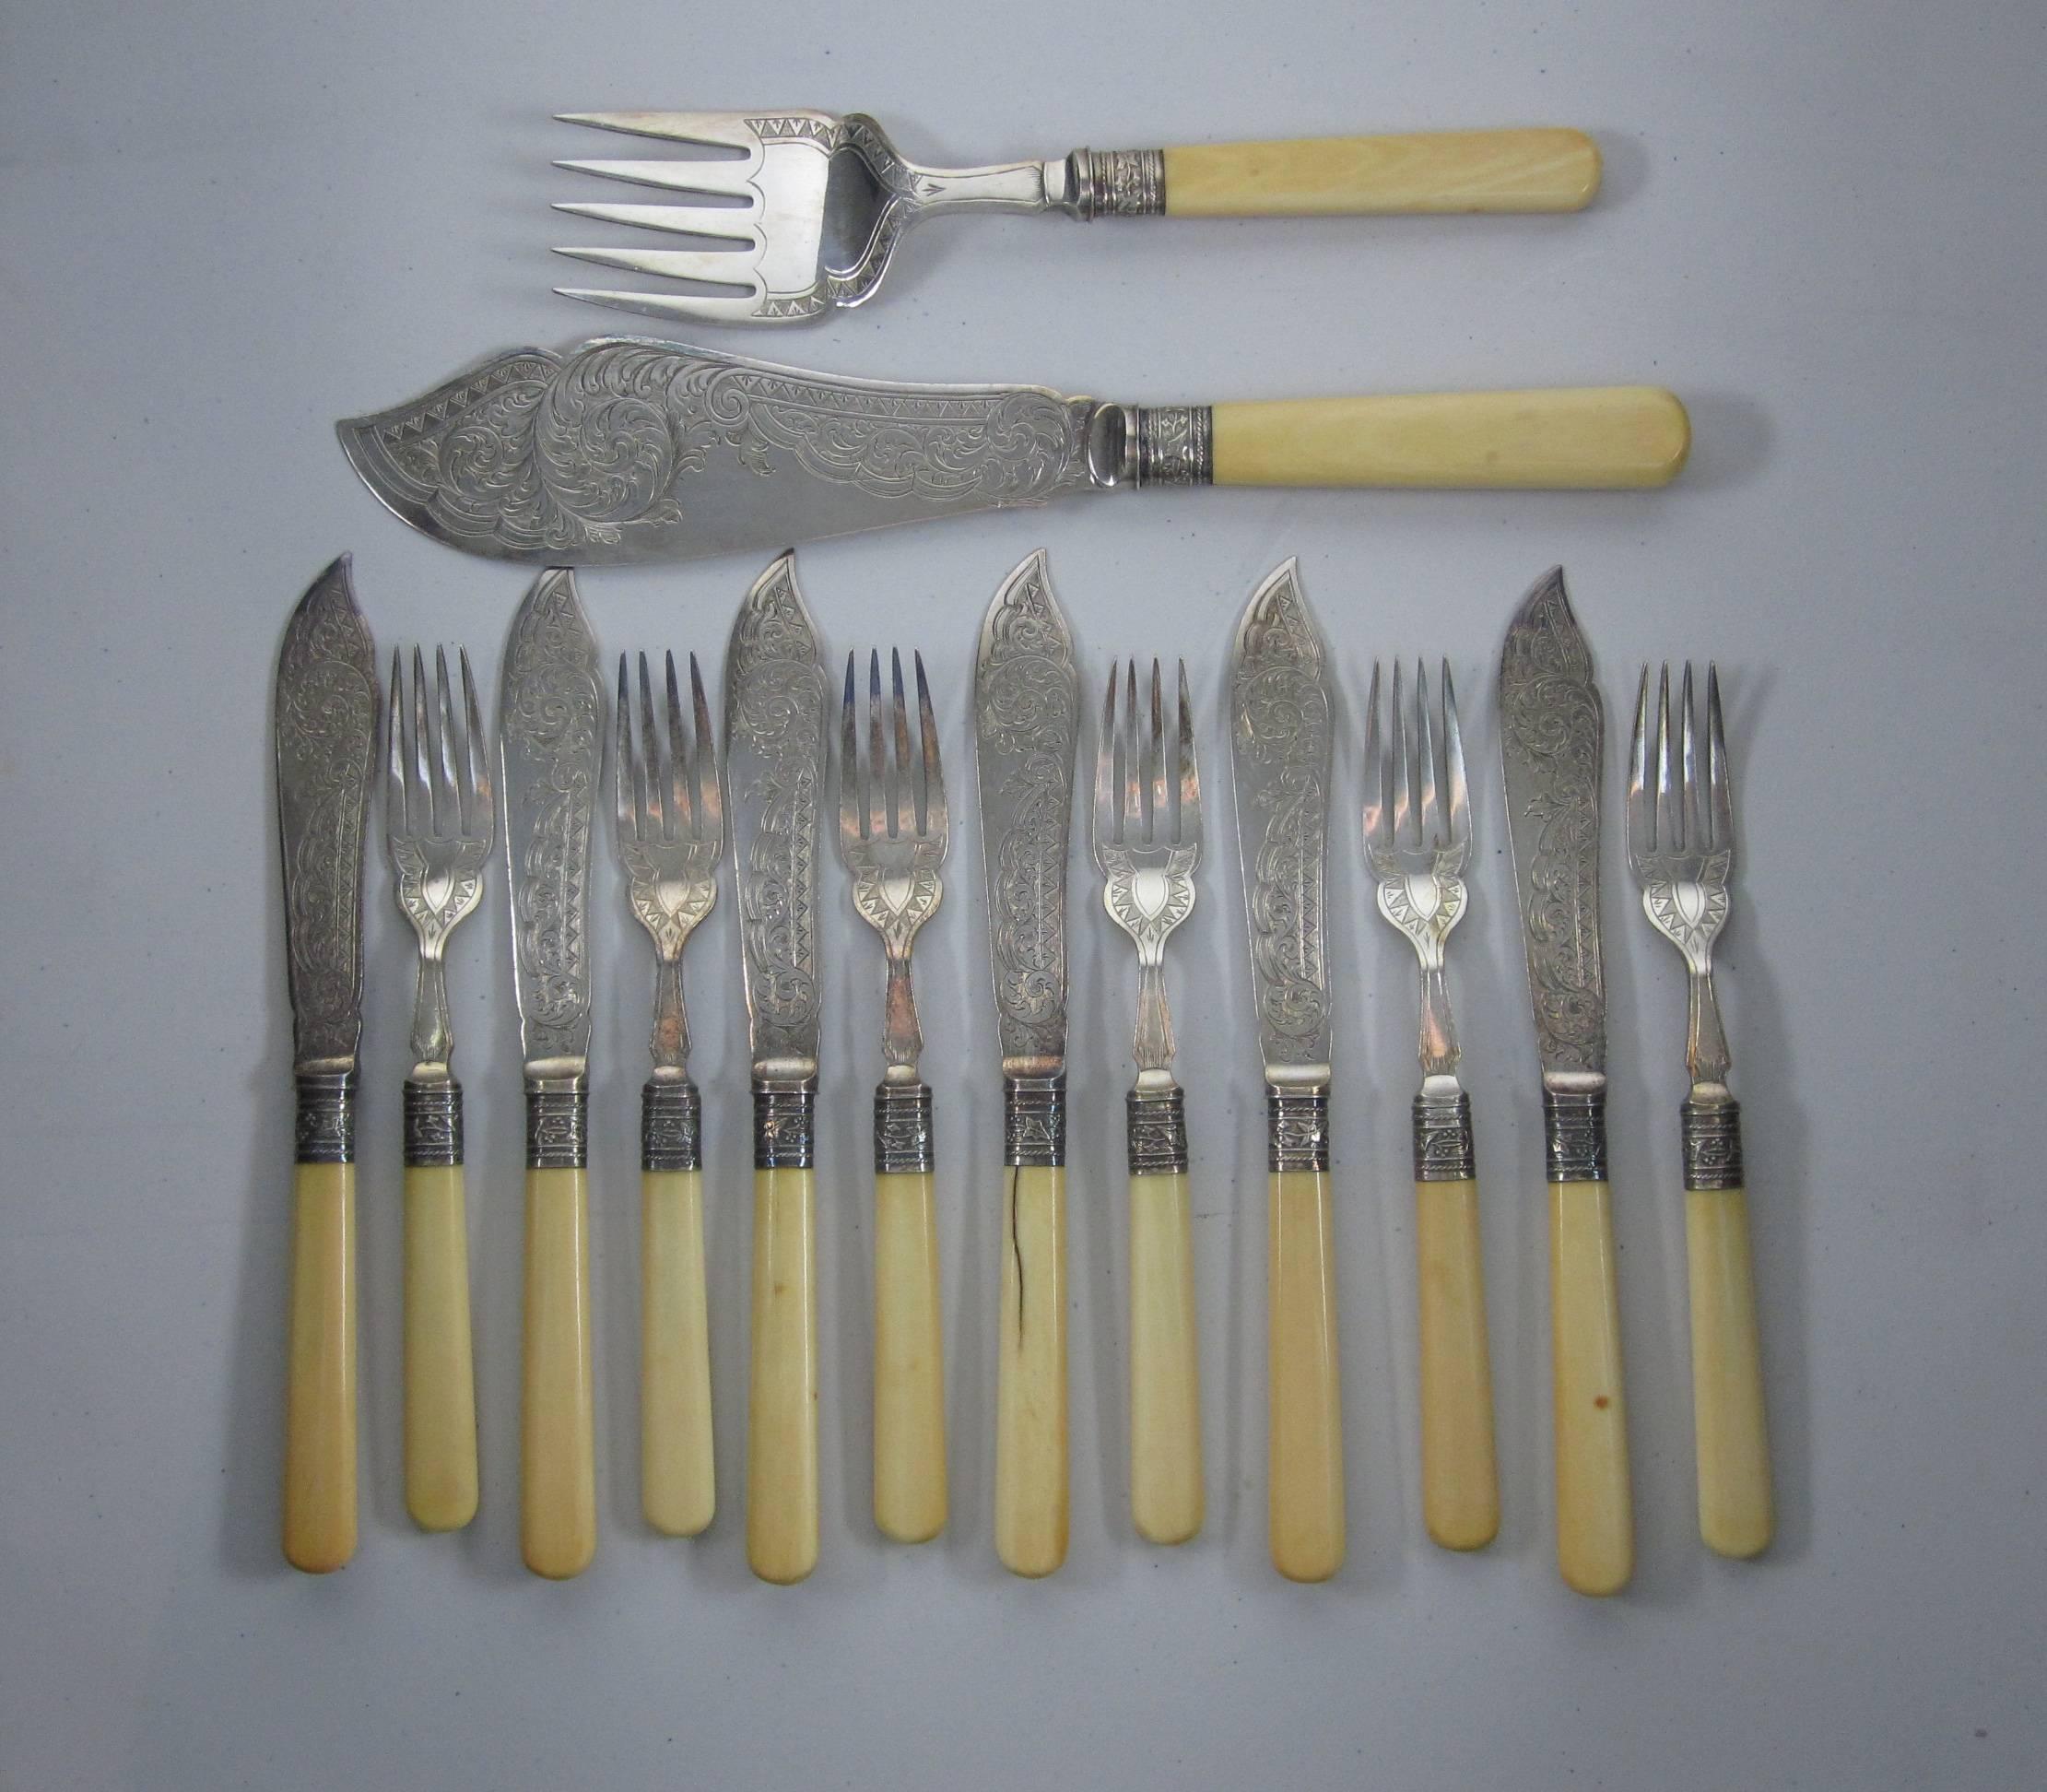 English bone-handled and silver plate fish cutlery set in a lined Walnut box, circa 1889-1910. Set includes: six forks, six knives, serving fork and serving knife all with ornately engraved blades.
Dimensions:
Forks, 7.50″ L x 1″ W.
Knives, 9.0″